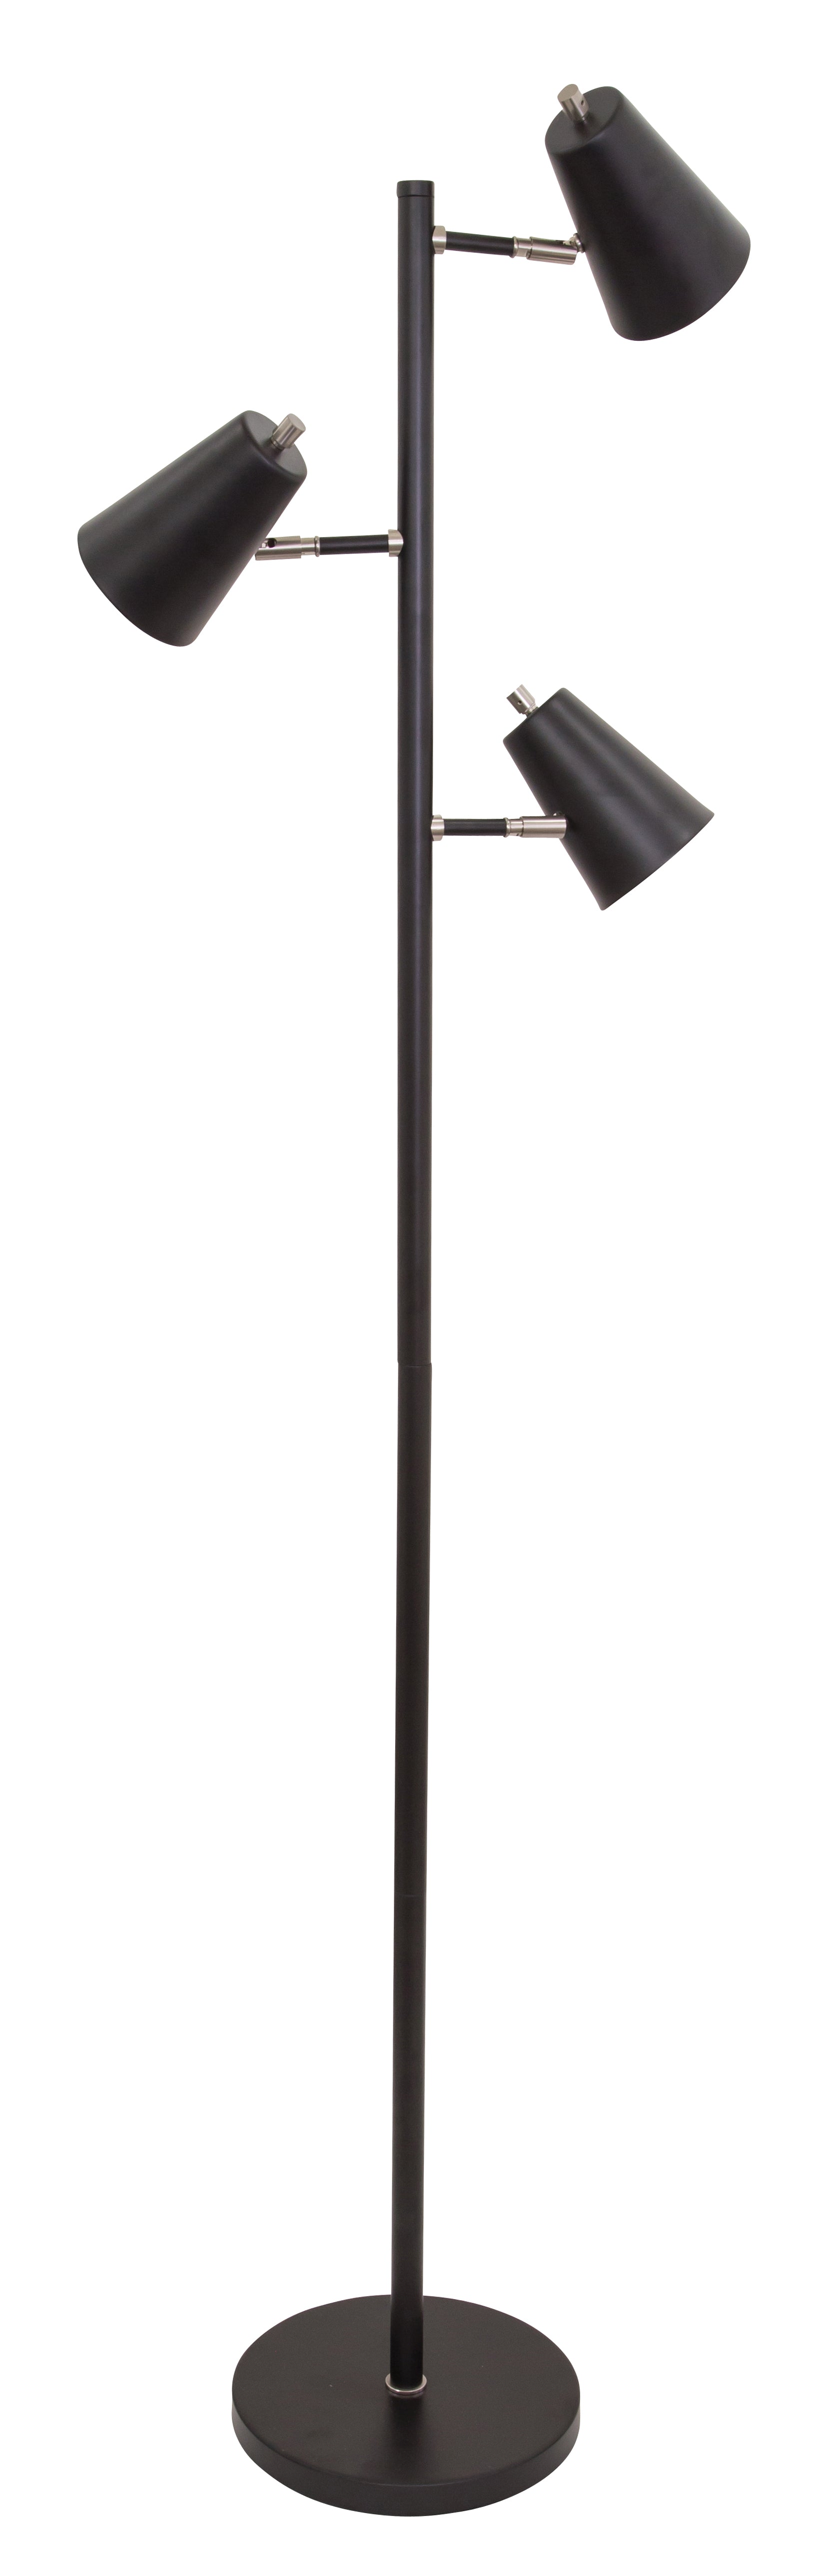 House of Troy Kirby LED three light floor lamp in black with satin nickel accents K130-BLK